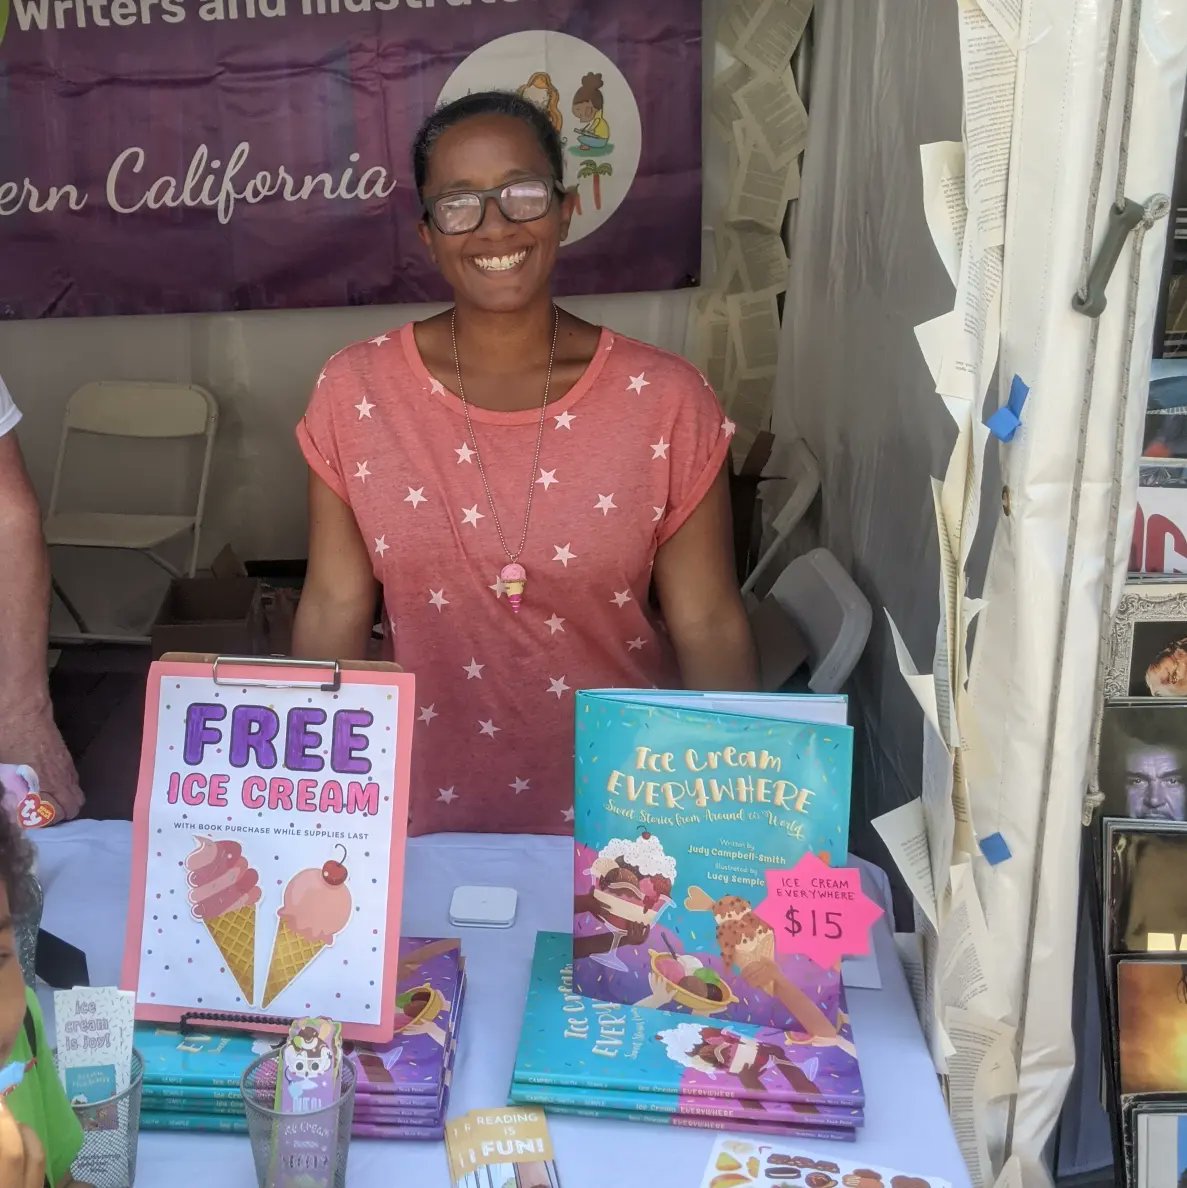 Super fun day at the @latimesfob with all the lovely folks in the @SCBWI_SoCal @SCBWISOCALLA booth! @SleepingBearBks @lucy_semple @PBbuds24